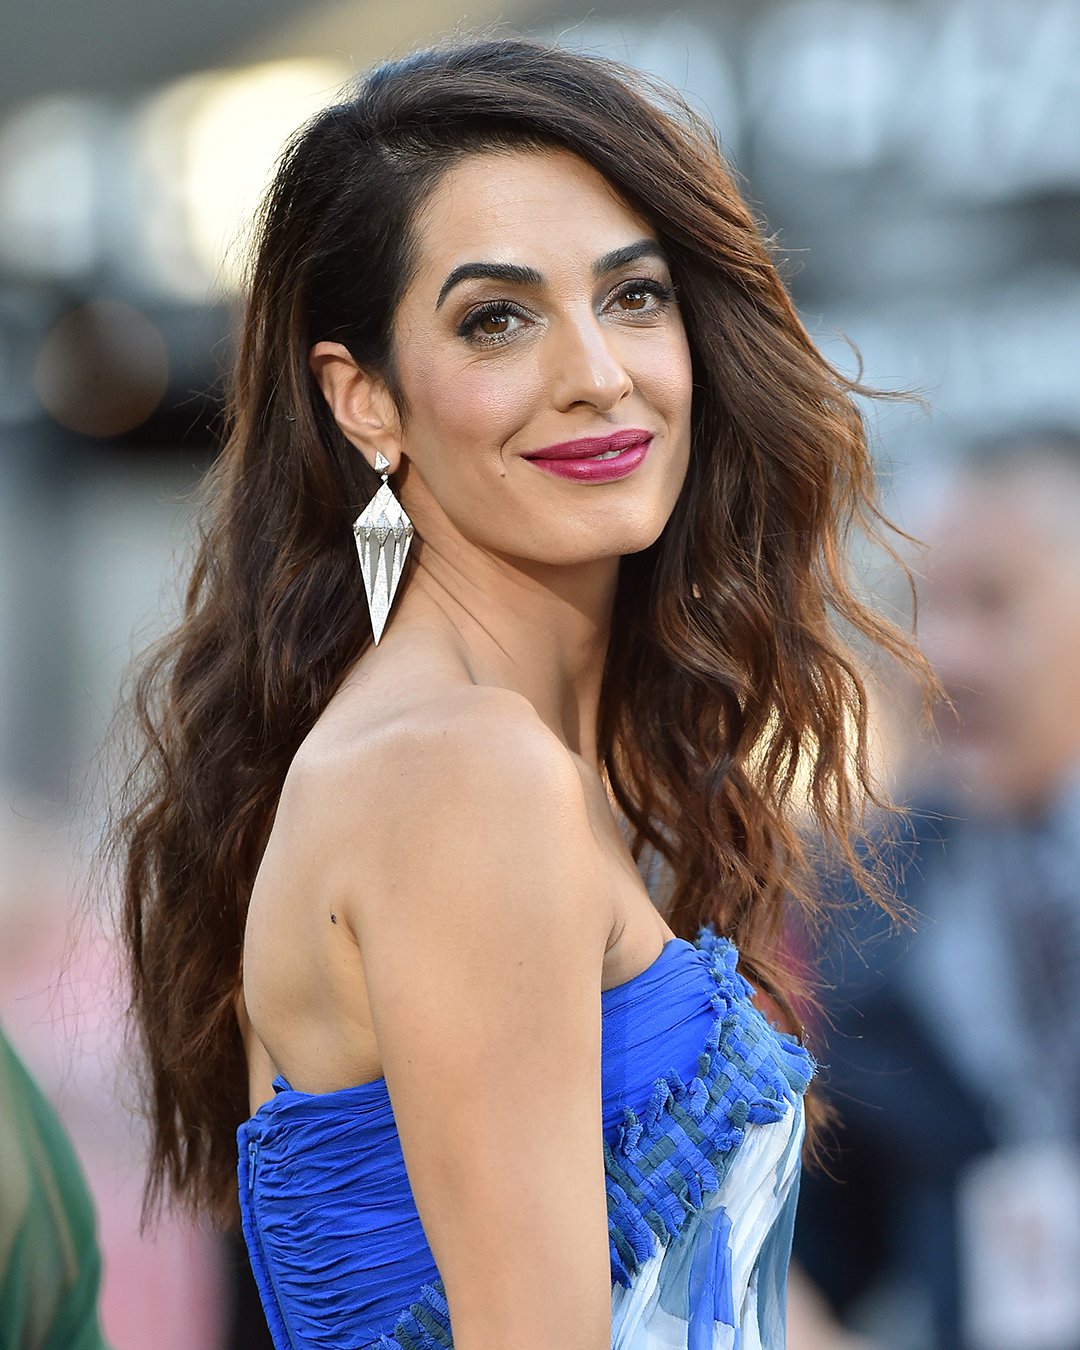 Beauty that looks flawless even in the 5th decade of life: These are the secrets of Amal Clooney